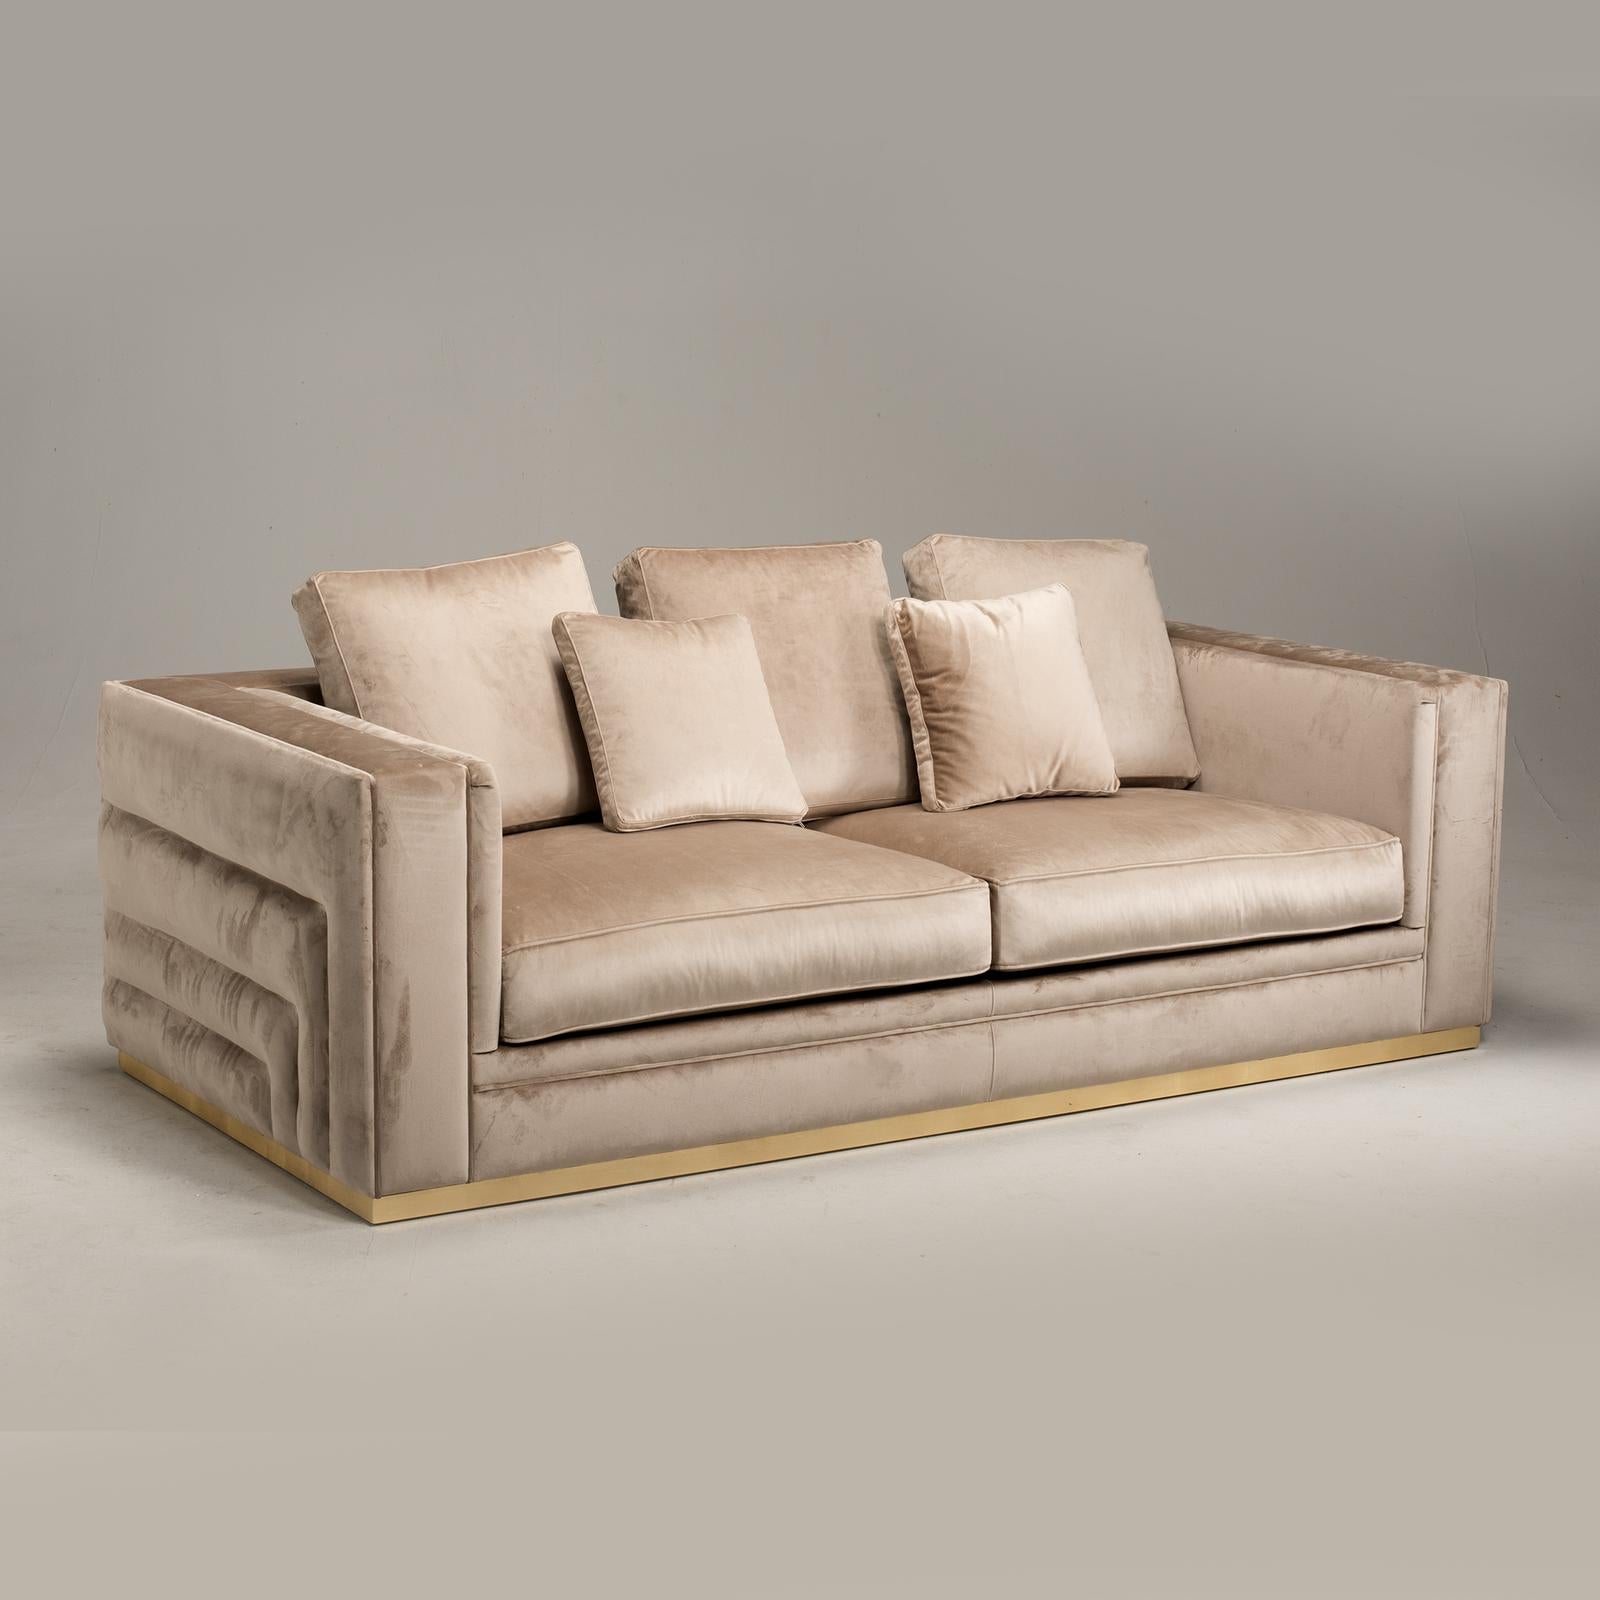 The Labyrinth sofa combines old with new to bring a cosmopolitan touch to any contemporary living space. Boasting clean lines to create a geometric silhouette, this glamorous sofa is upholstered in ultra-soft velvety fabric. Set on a square gold